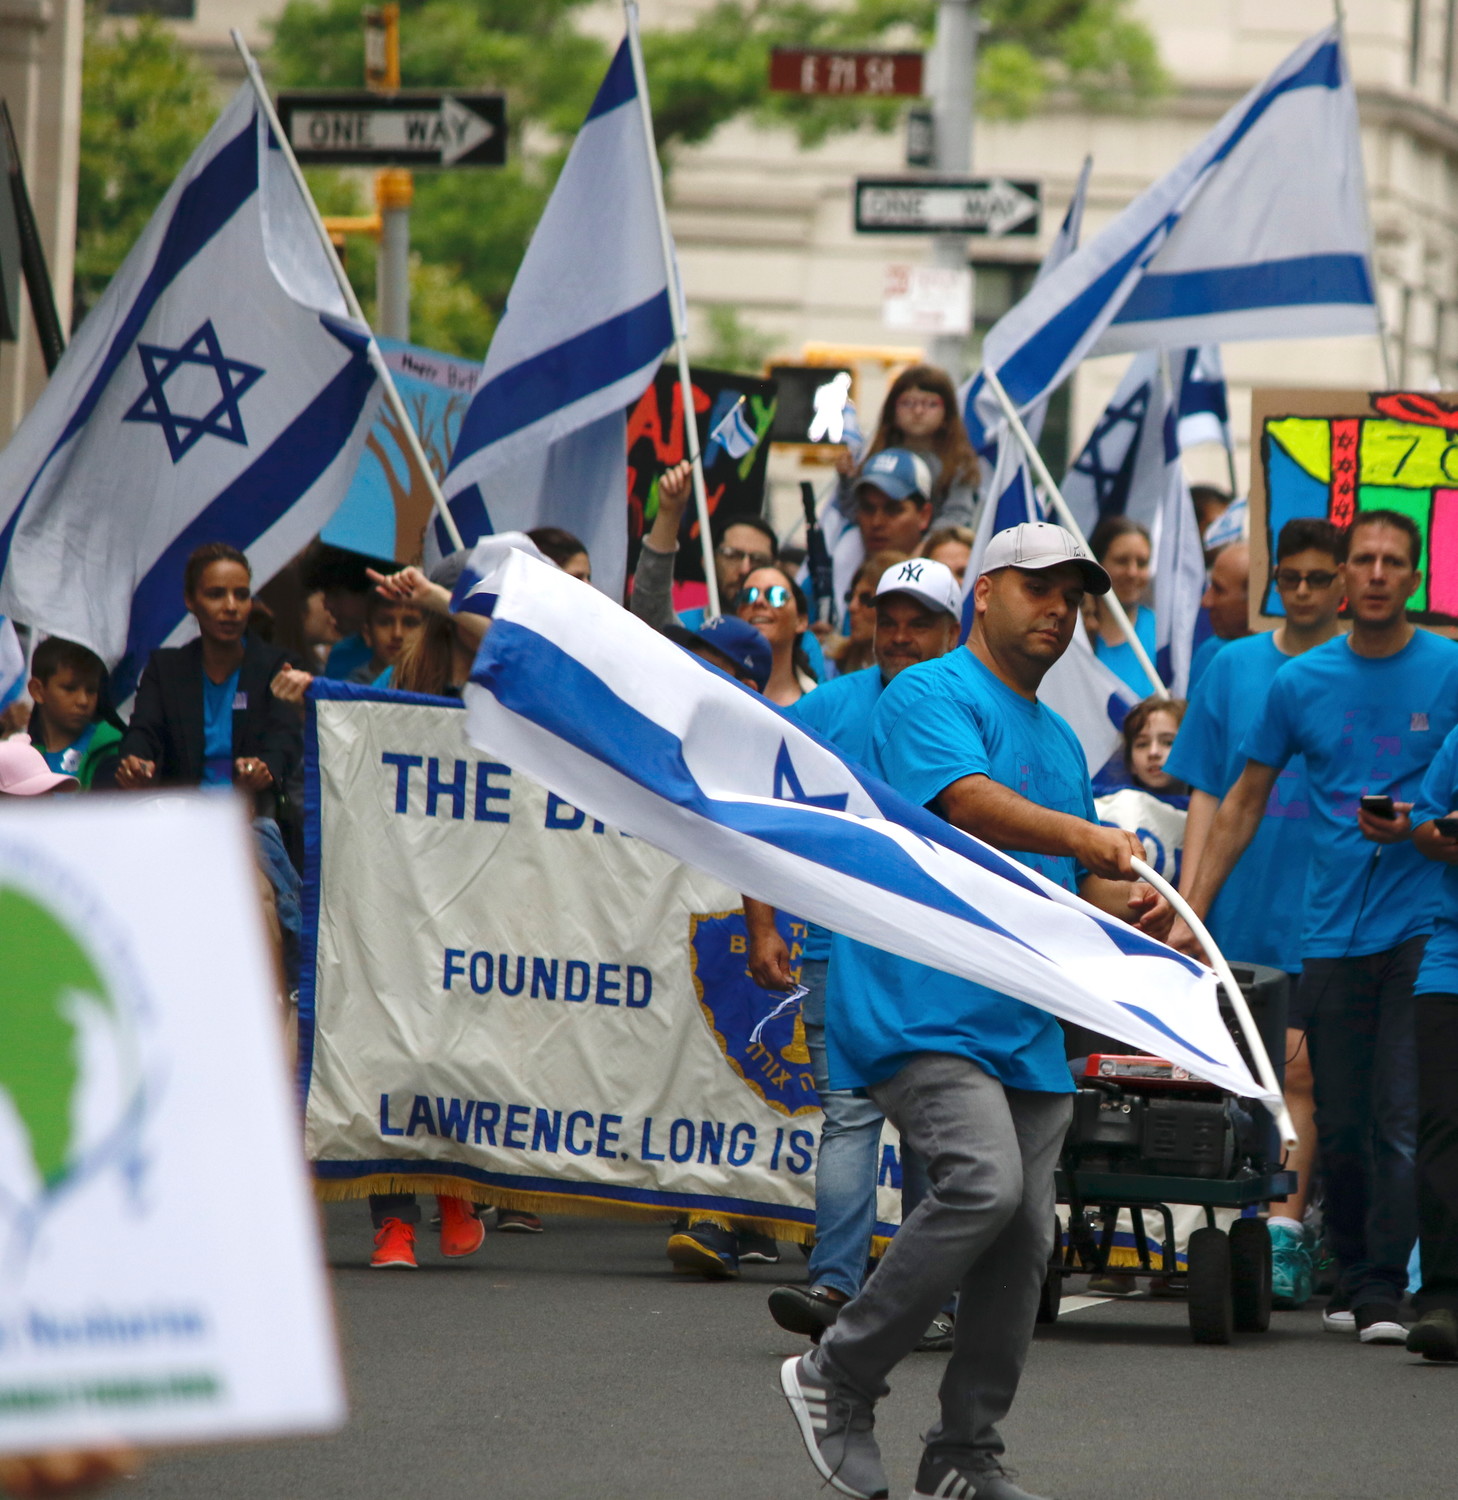 A member of the contingent from the Brandeis School in Lawrence waves Israel's flag.